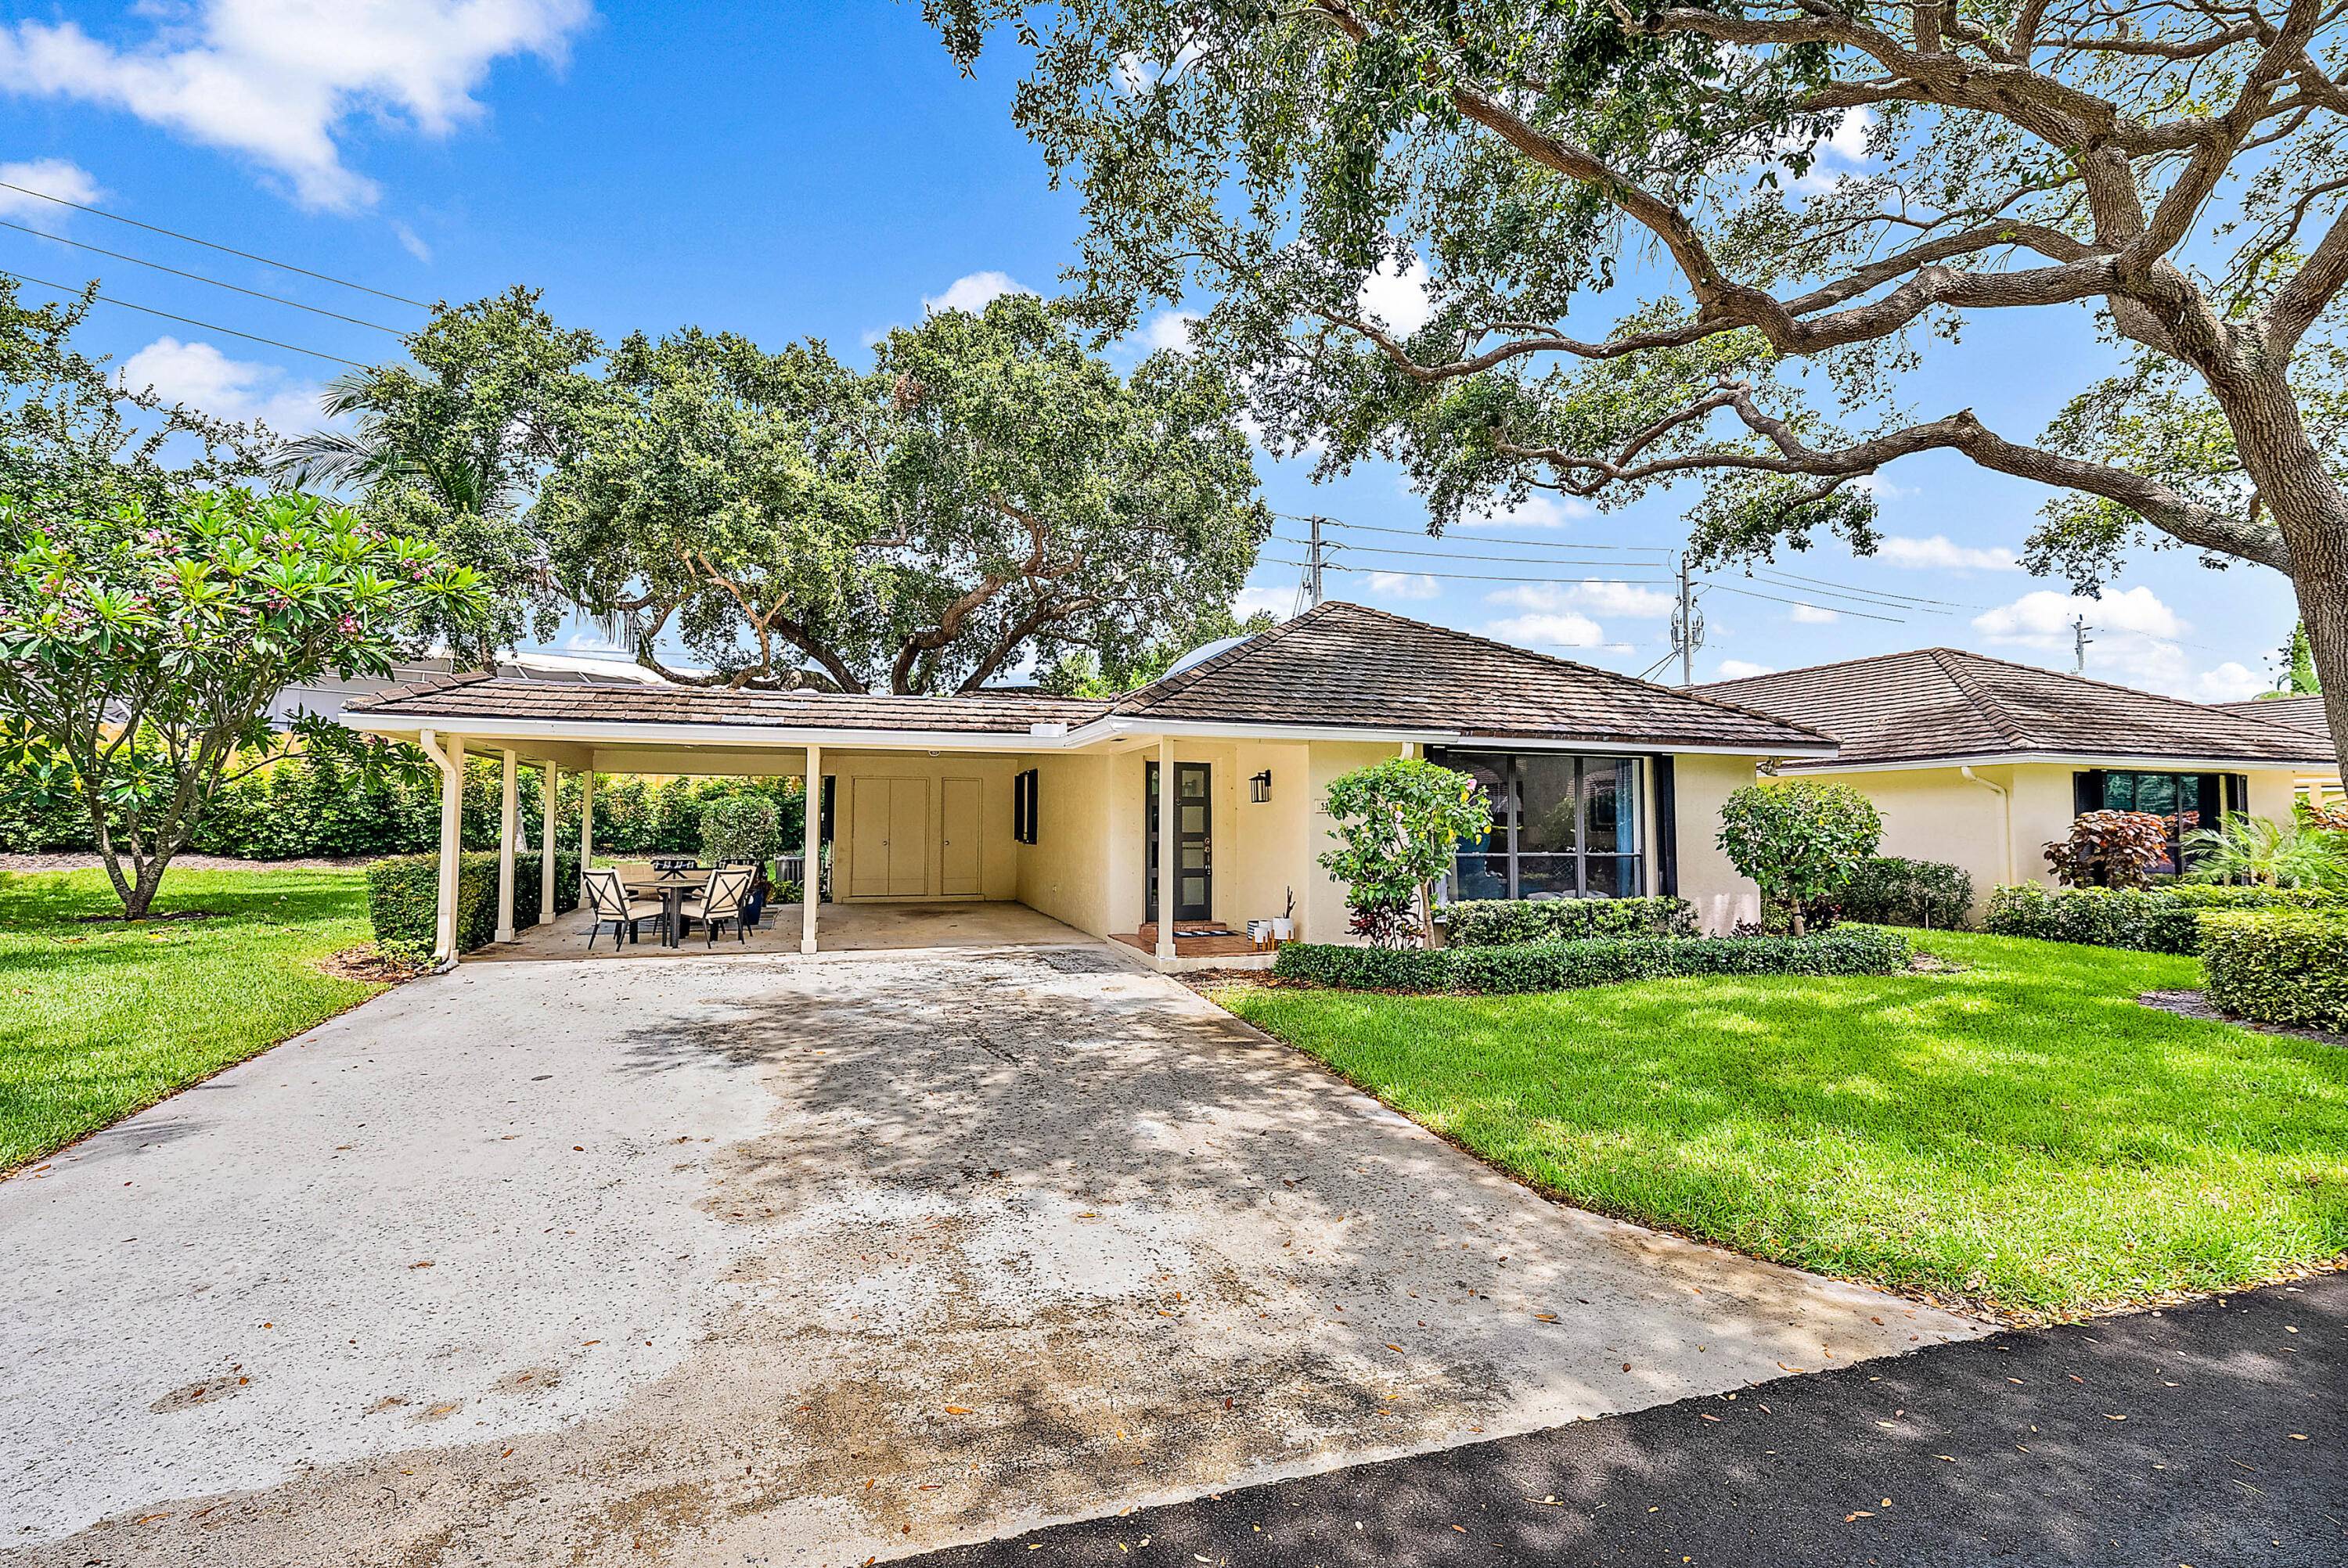 Charming one story villa located at the end of a quiet street within the gated waterfront community of Twelve Oaks.